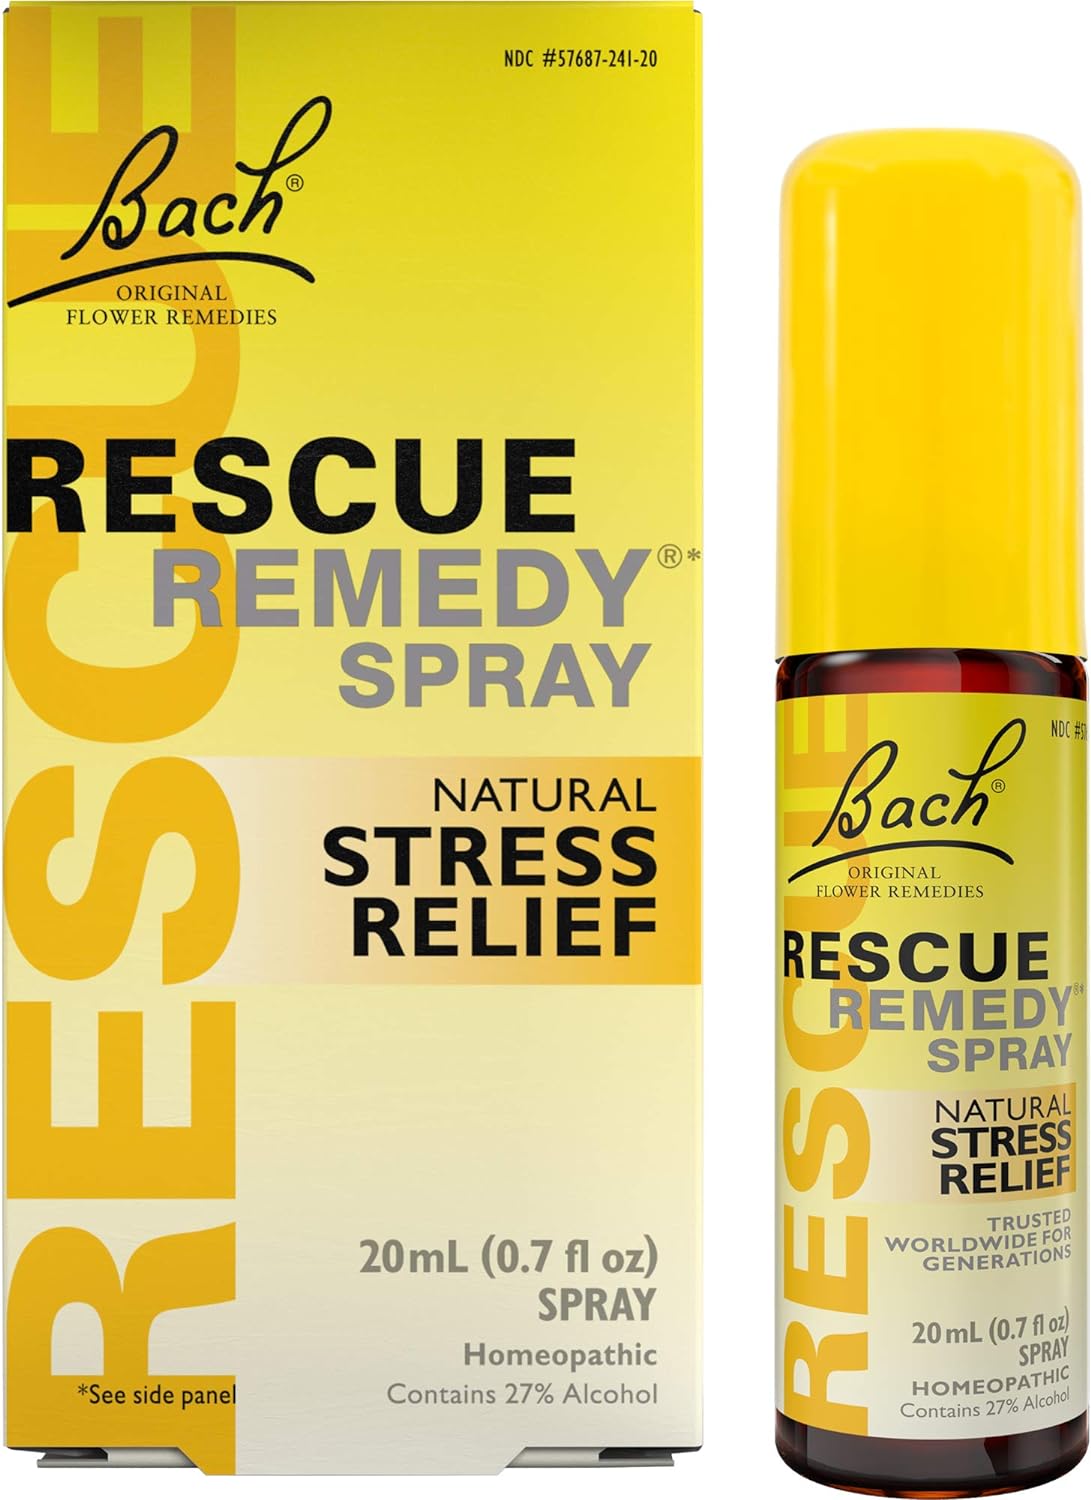 Bach RESCUE REMEDY Spray 20mL, Natural Stress Relief, Homeopathic Flower Essence, Vegan, Gluten & Sugar-Free, Non-Habit Forming (Packaging May Vary)